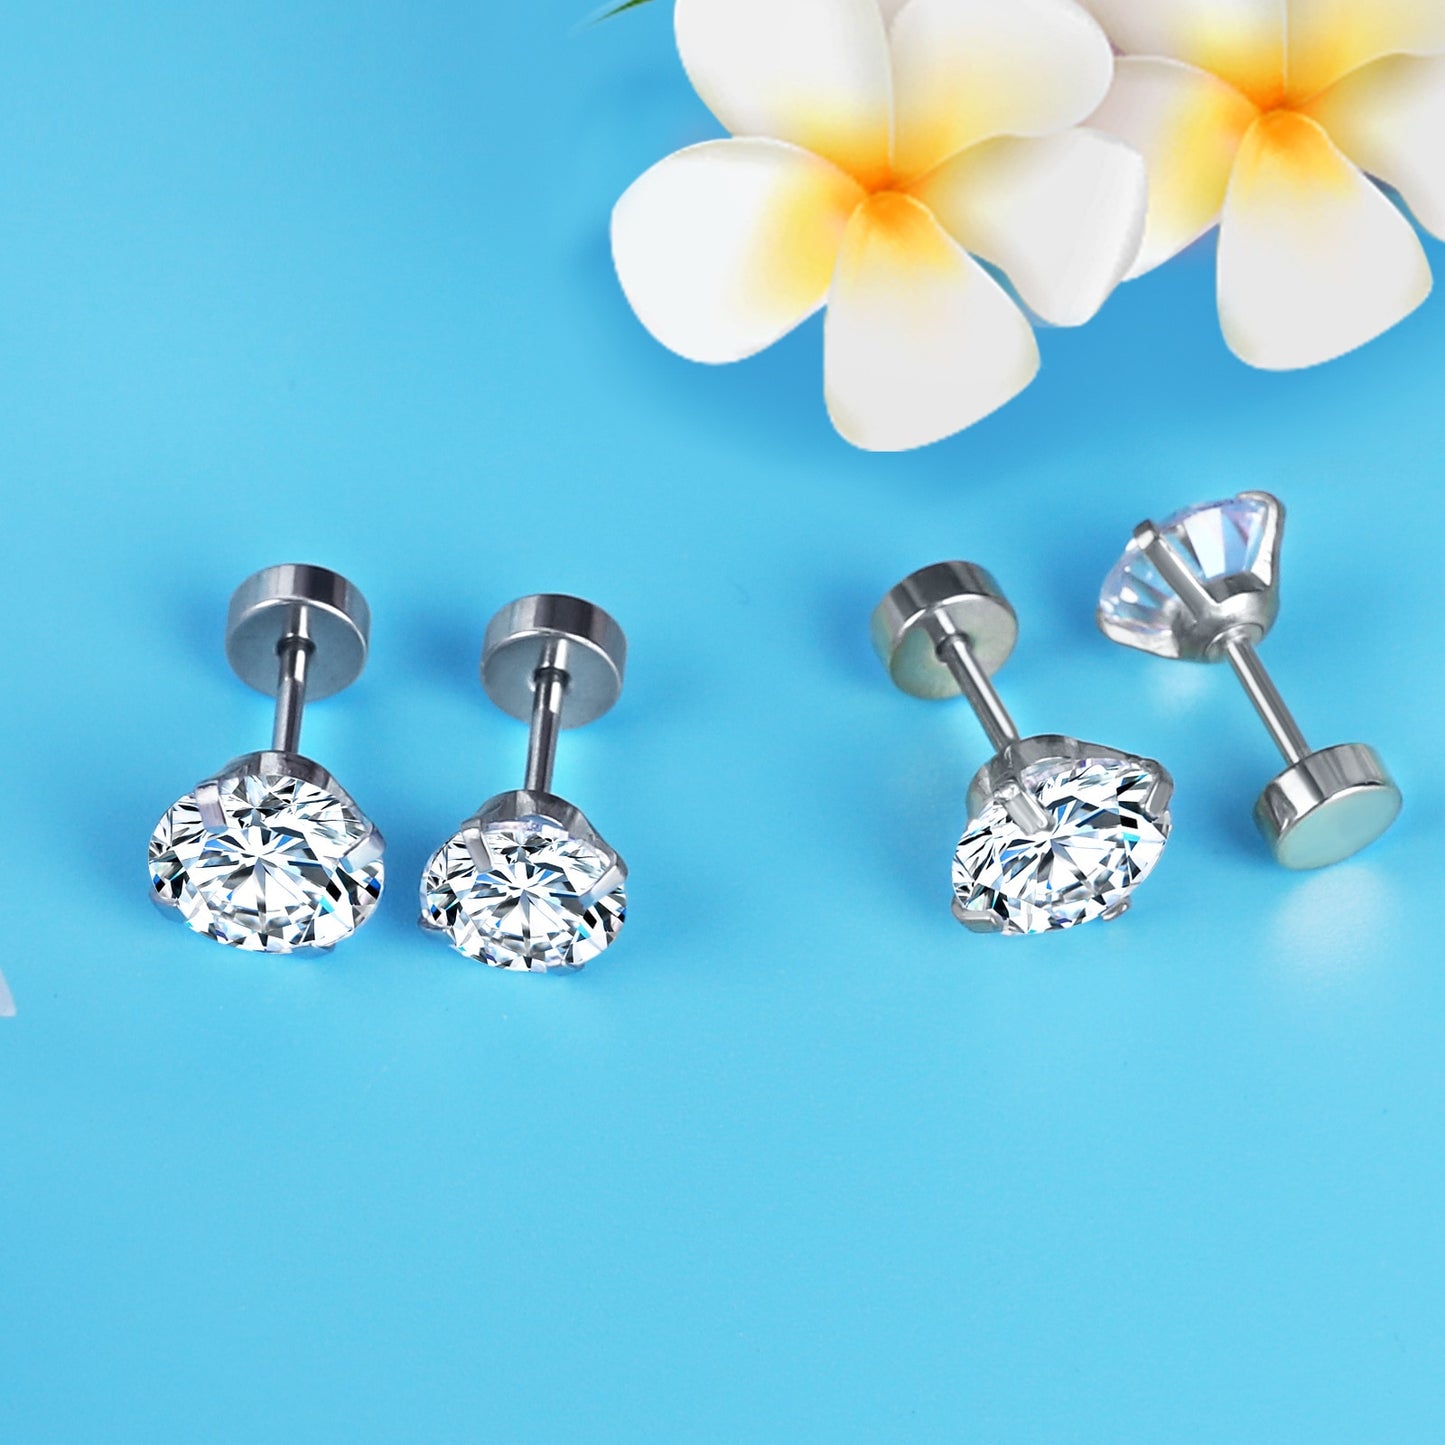 SHINE CUBIC ZIRCONIA - Crafted from exquisite AAA+ cubic zirconia, our jewellery 